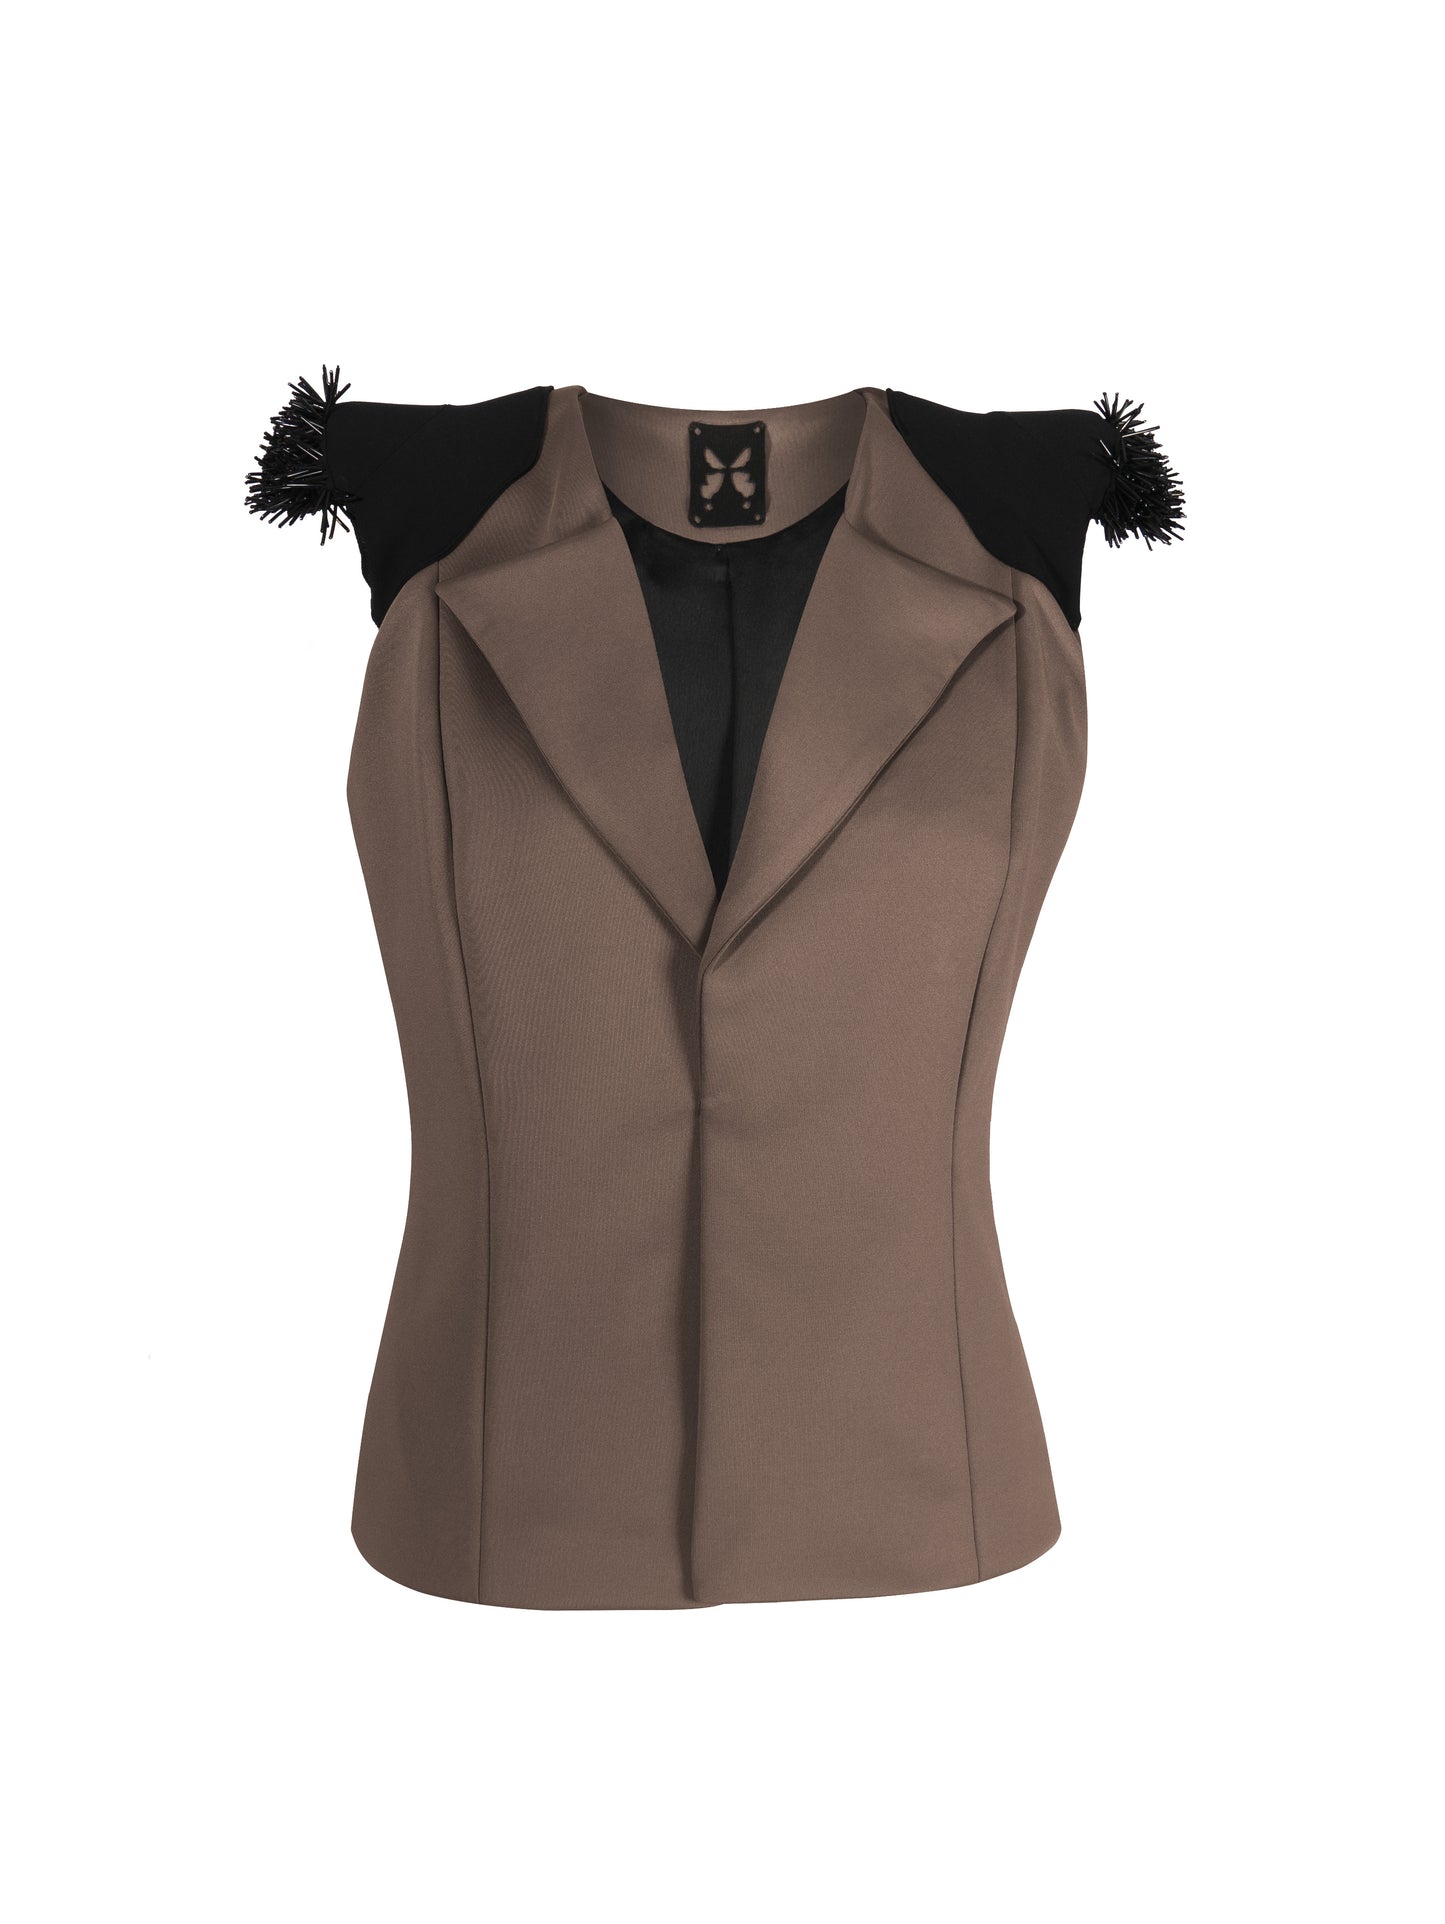 AVA, sleeveless jacket with contrasted shoulder pads and abstract embroidery